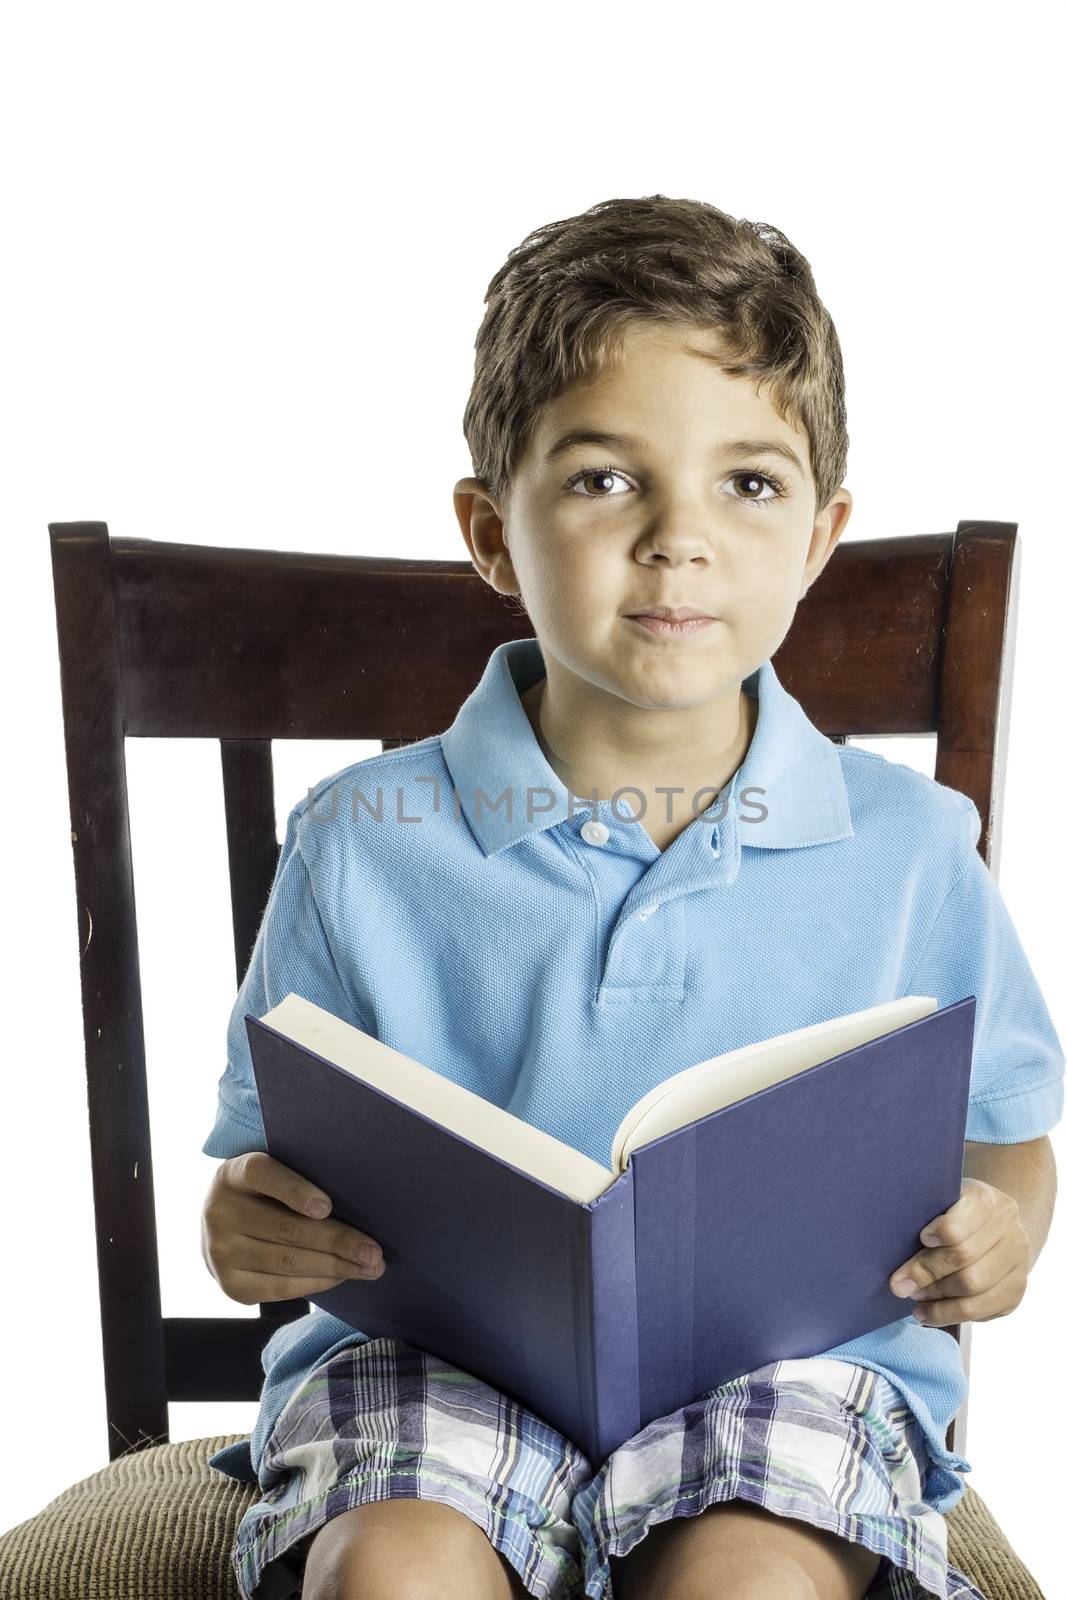 A young boy sitting in a chair reading a book.